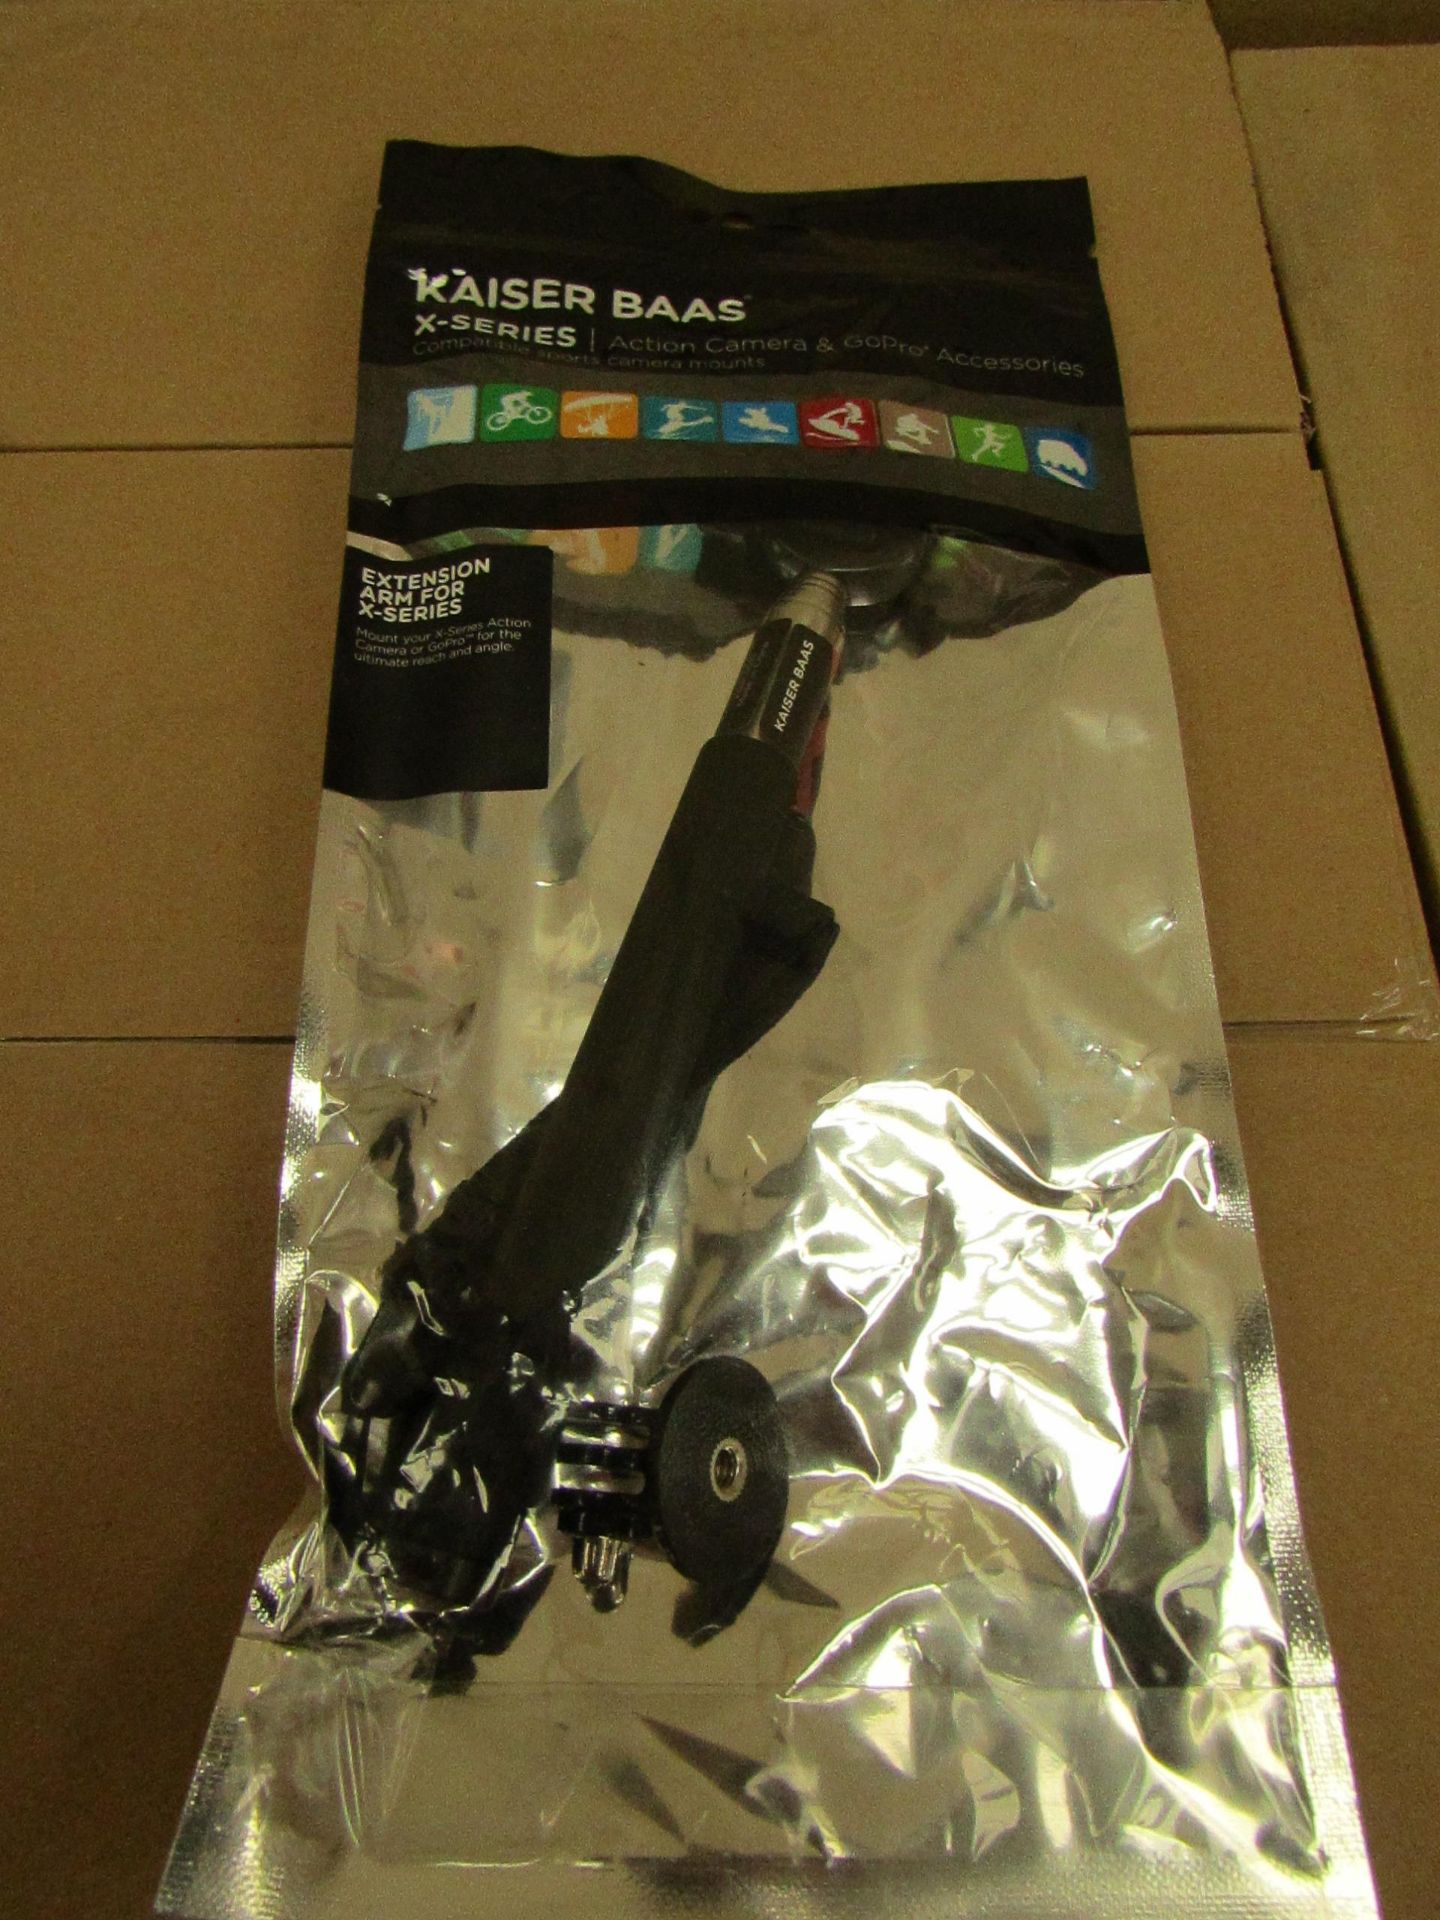 15x Kaiser Baas - X-Series Extension Arm - Suitbable Action Camera & GoPro - Unused & Packaged.